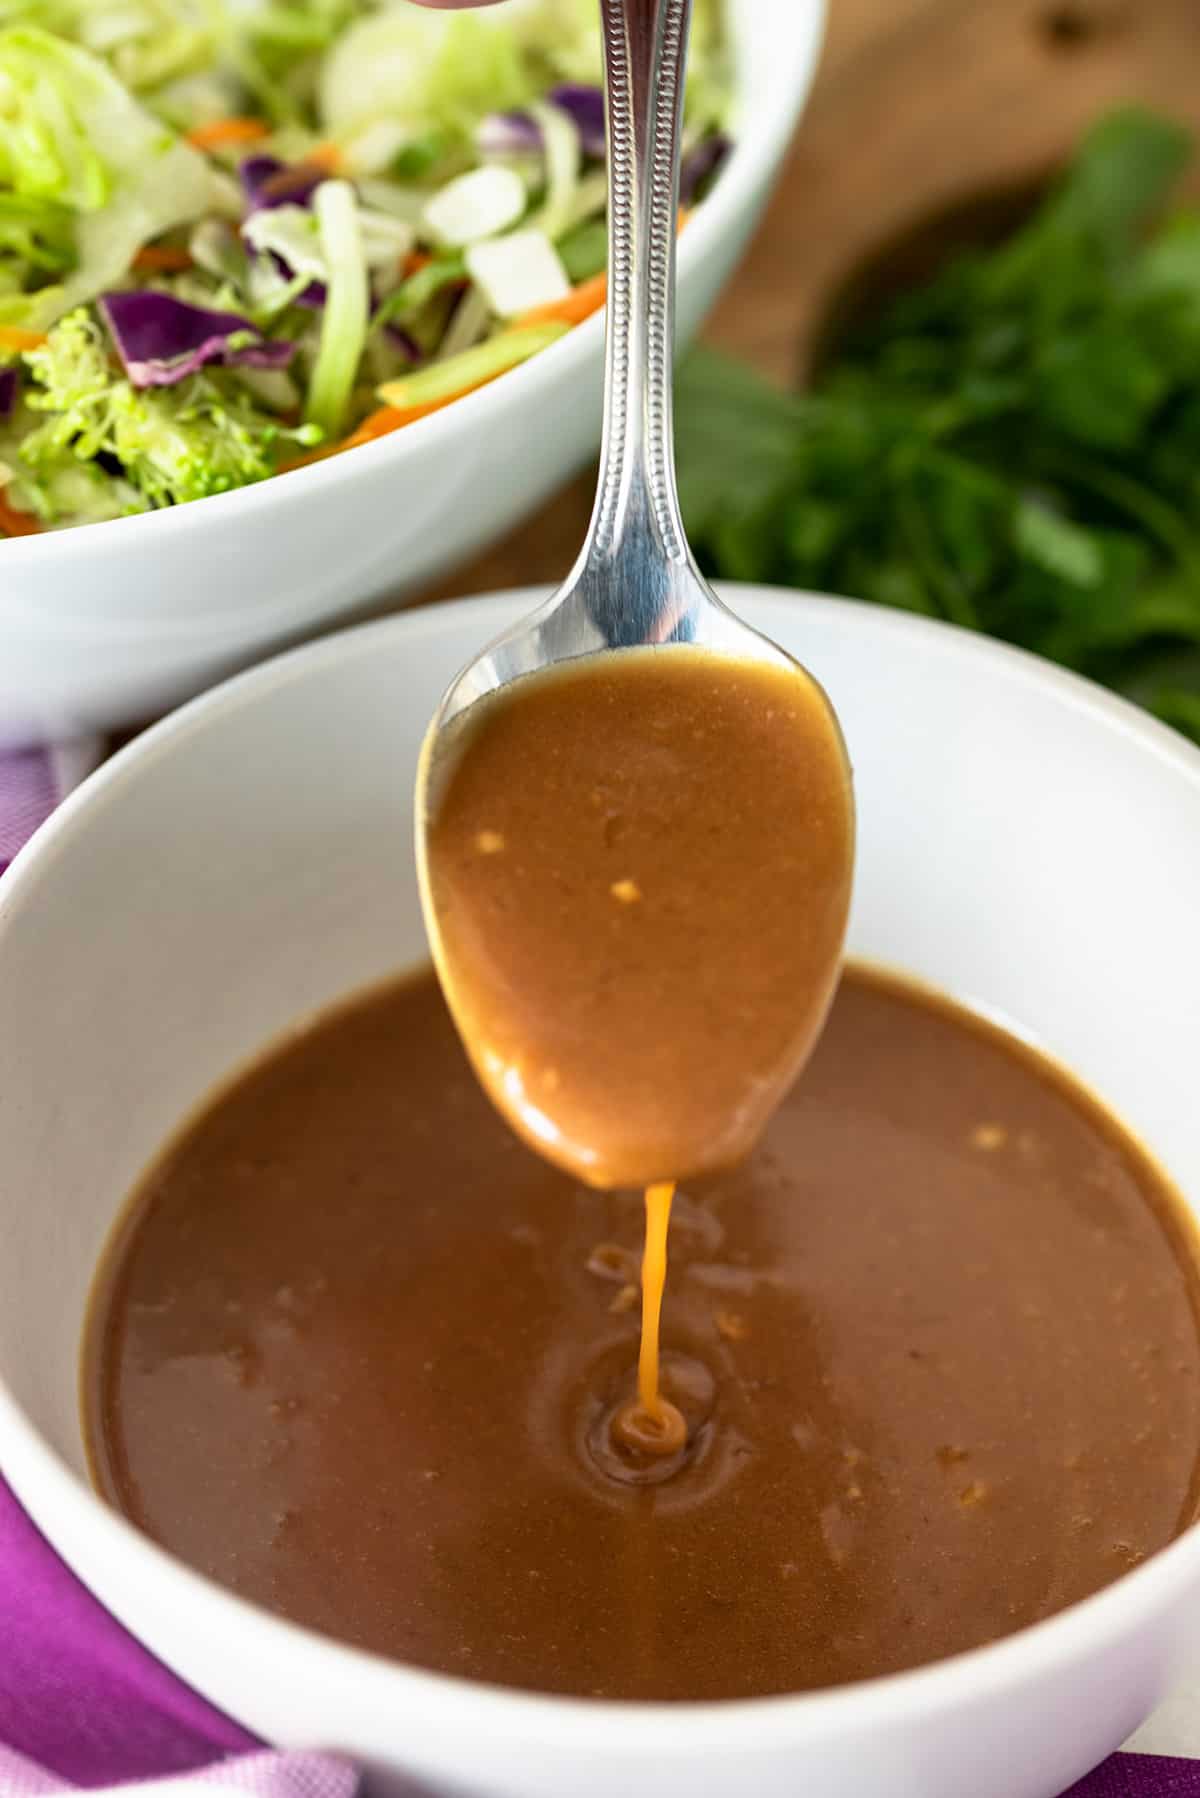 Ginger Peanut Sauce dripping off a spoon into a bowl.